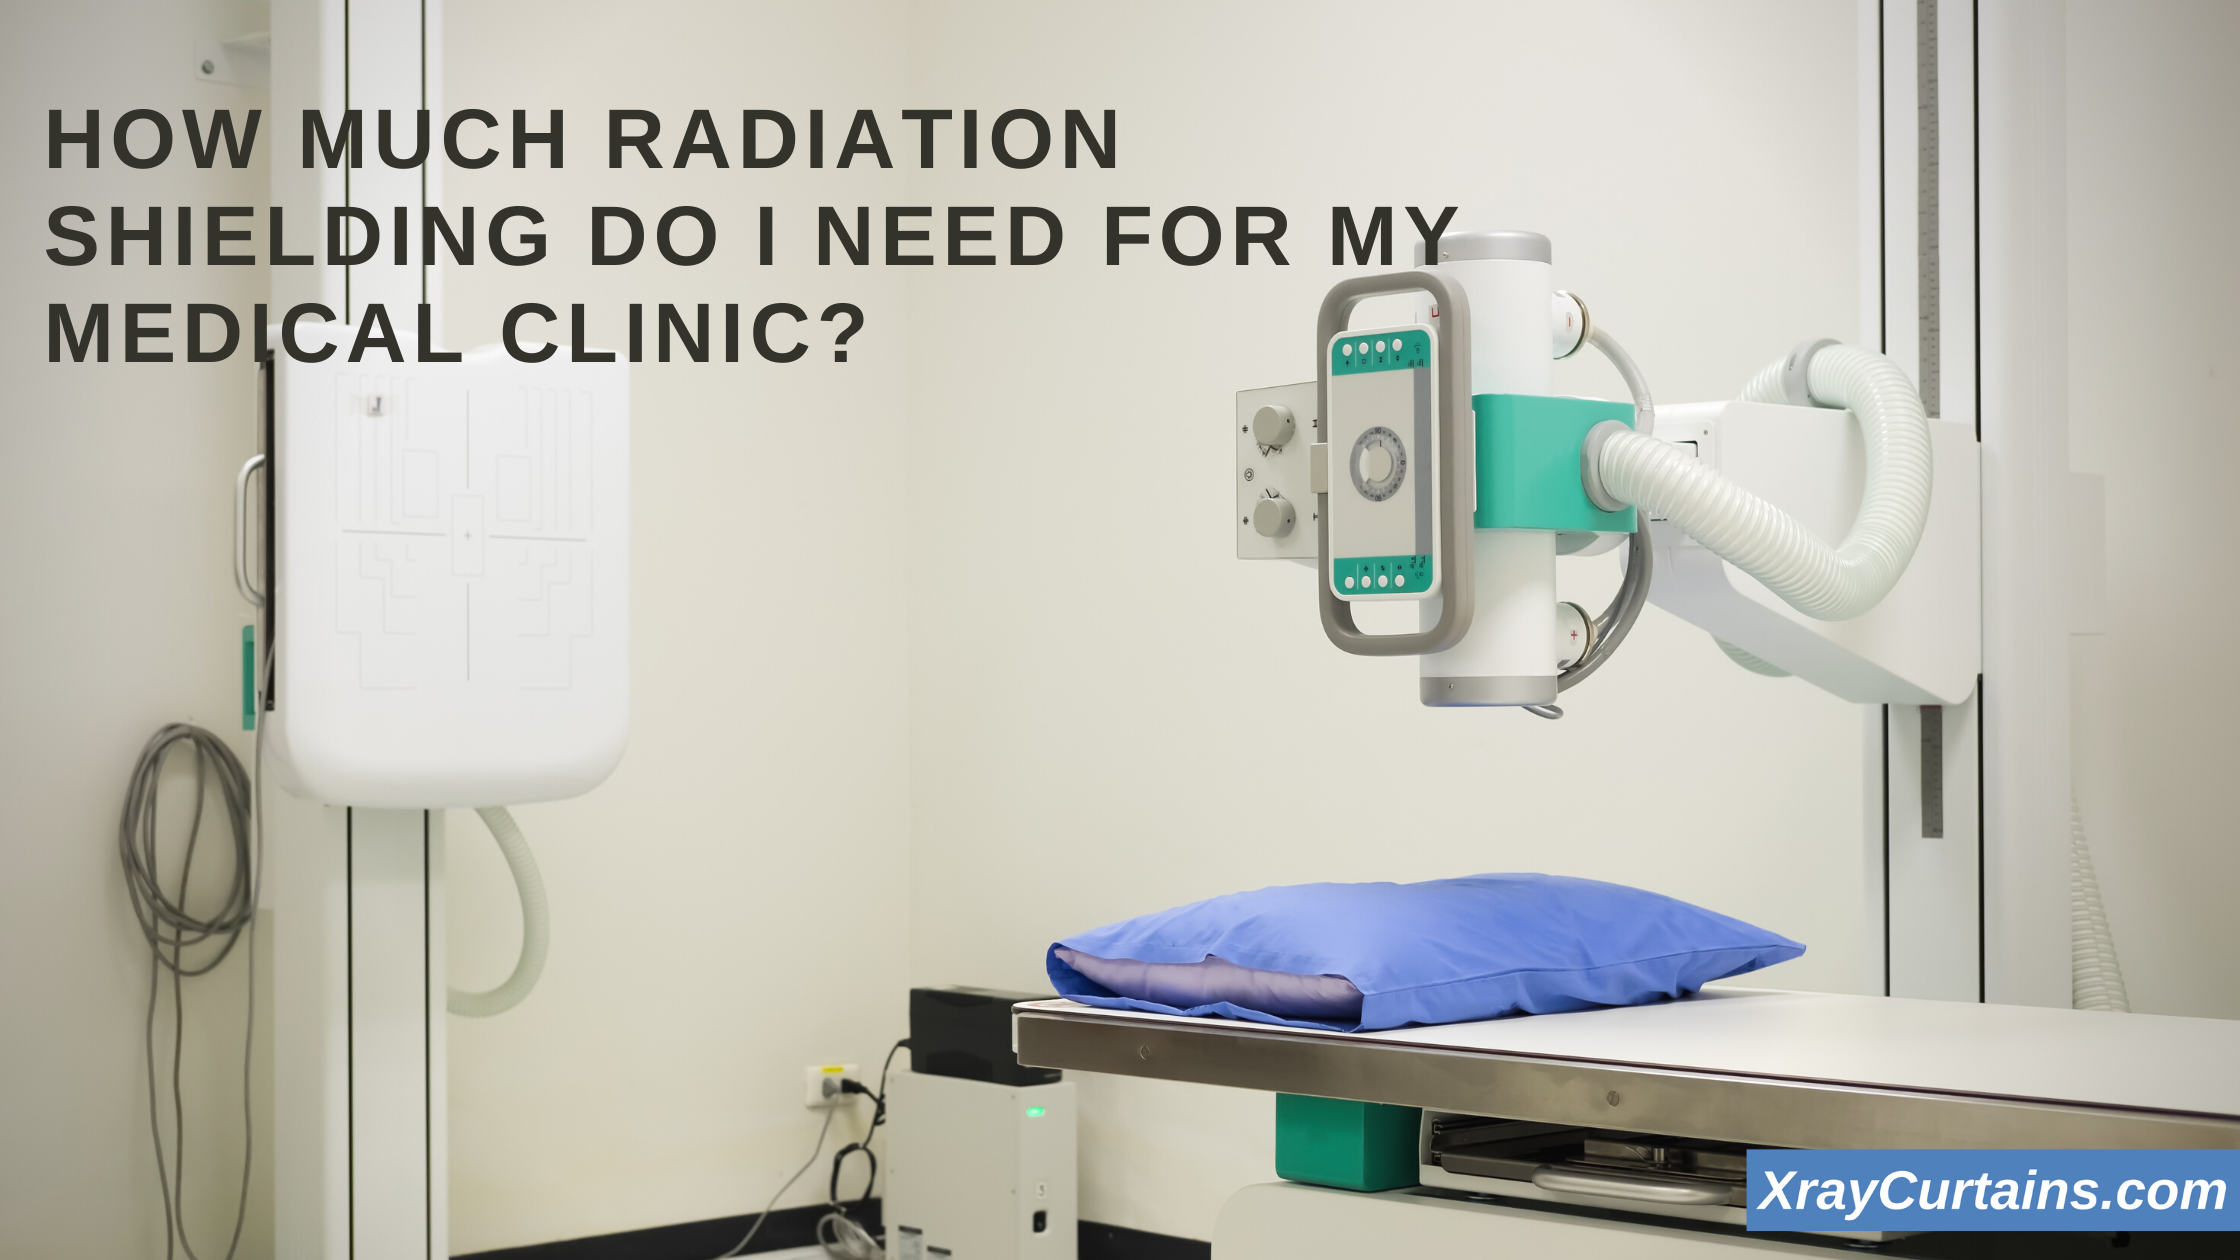 http://cdn.shopify.com/s/files/1/0475/1461/files/How_Much_Radiation_Shielding_Do_I_Need_For_My_Medical_Clinic.png?v=1630008210